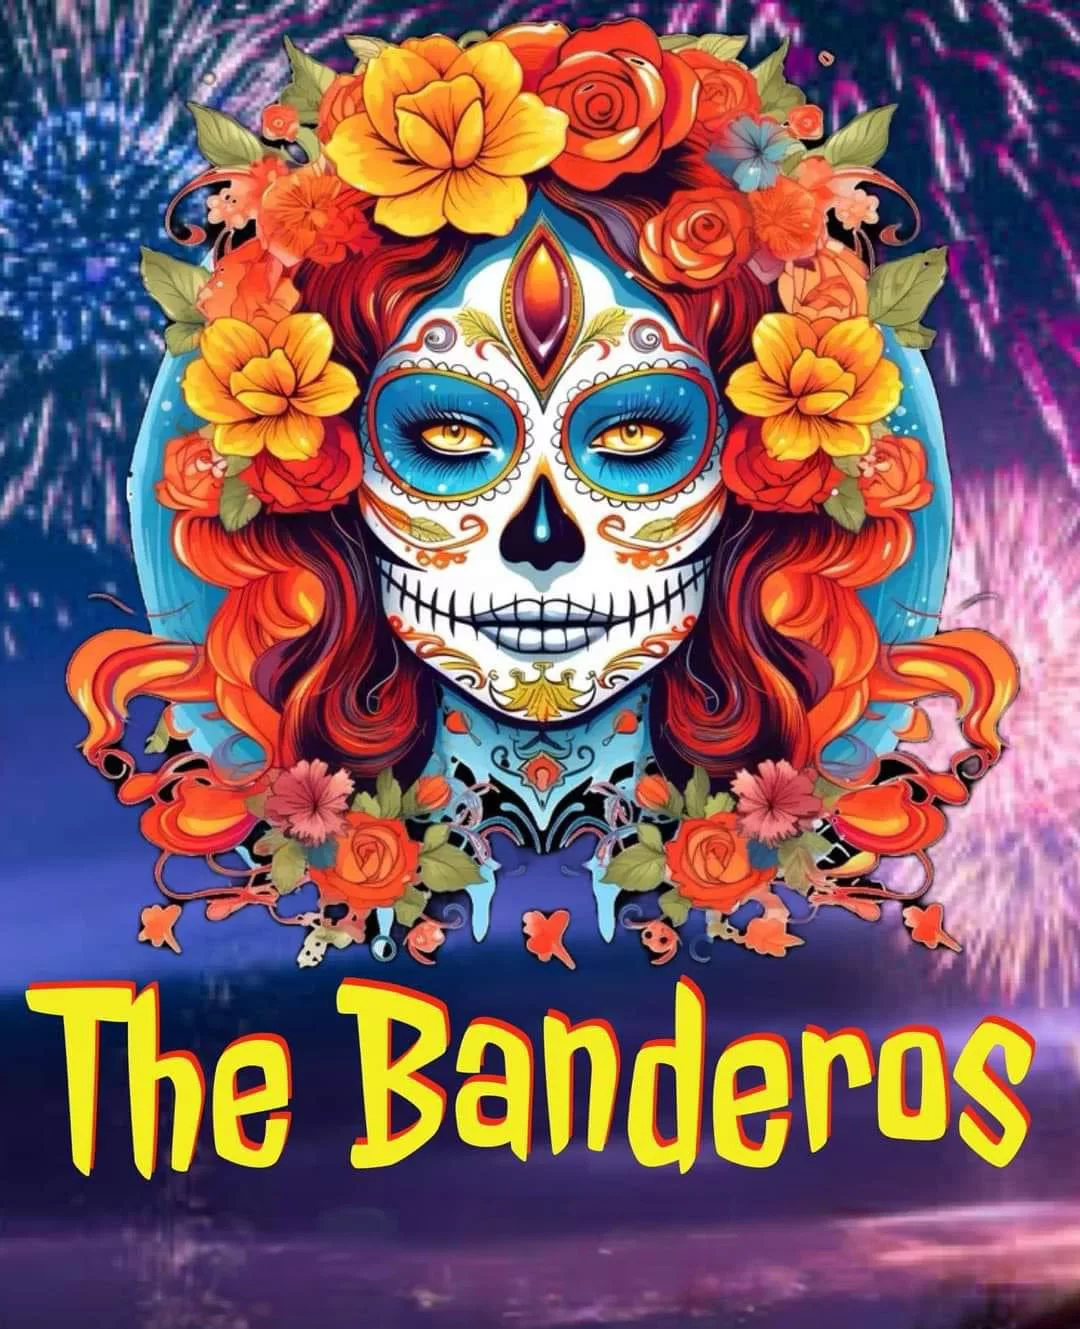 Banderos. Malvern Rocks Gig Guide for Music in Malvern. Gigs, concerts, live music, open mic nights. Make Malvern your destination for music.